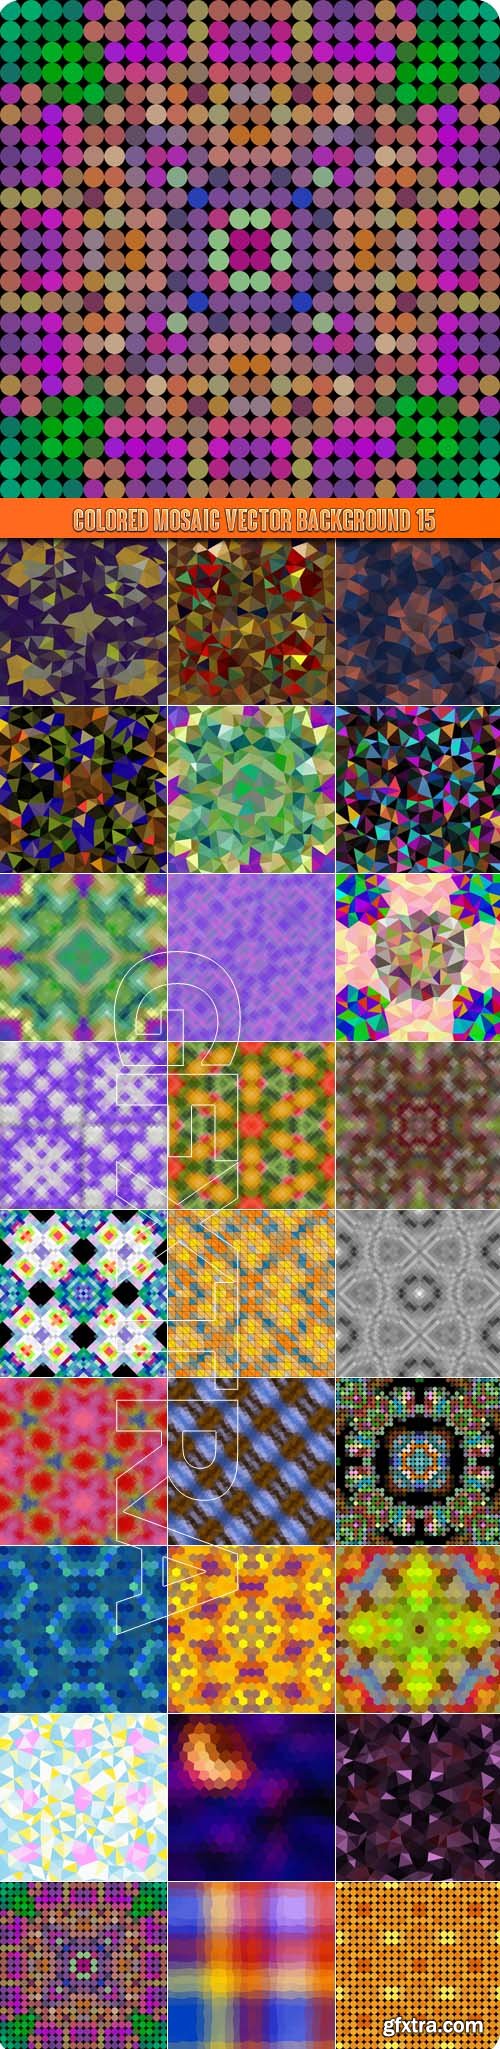 Colored mosaic vector background 15